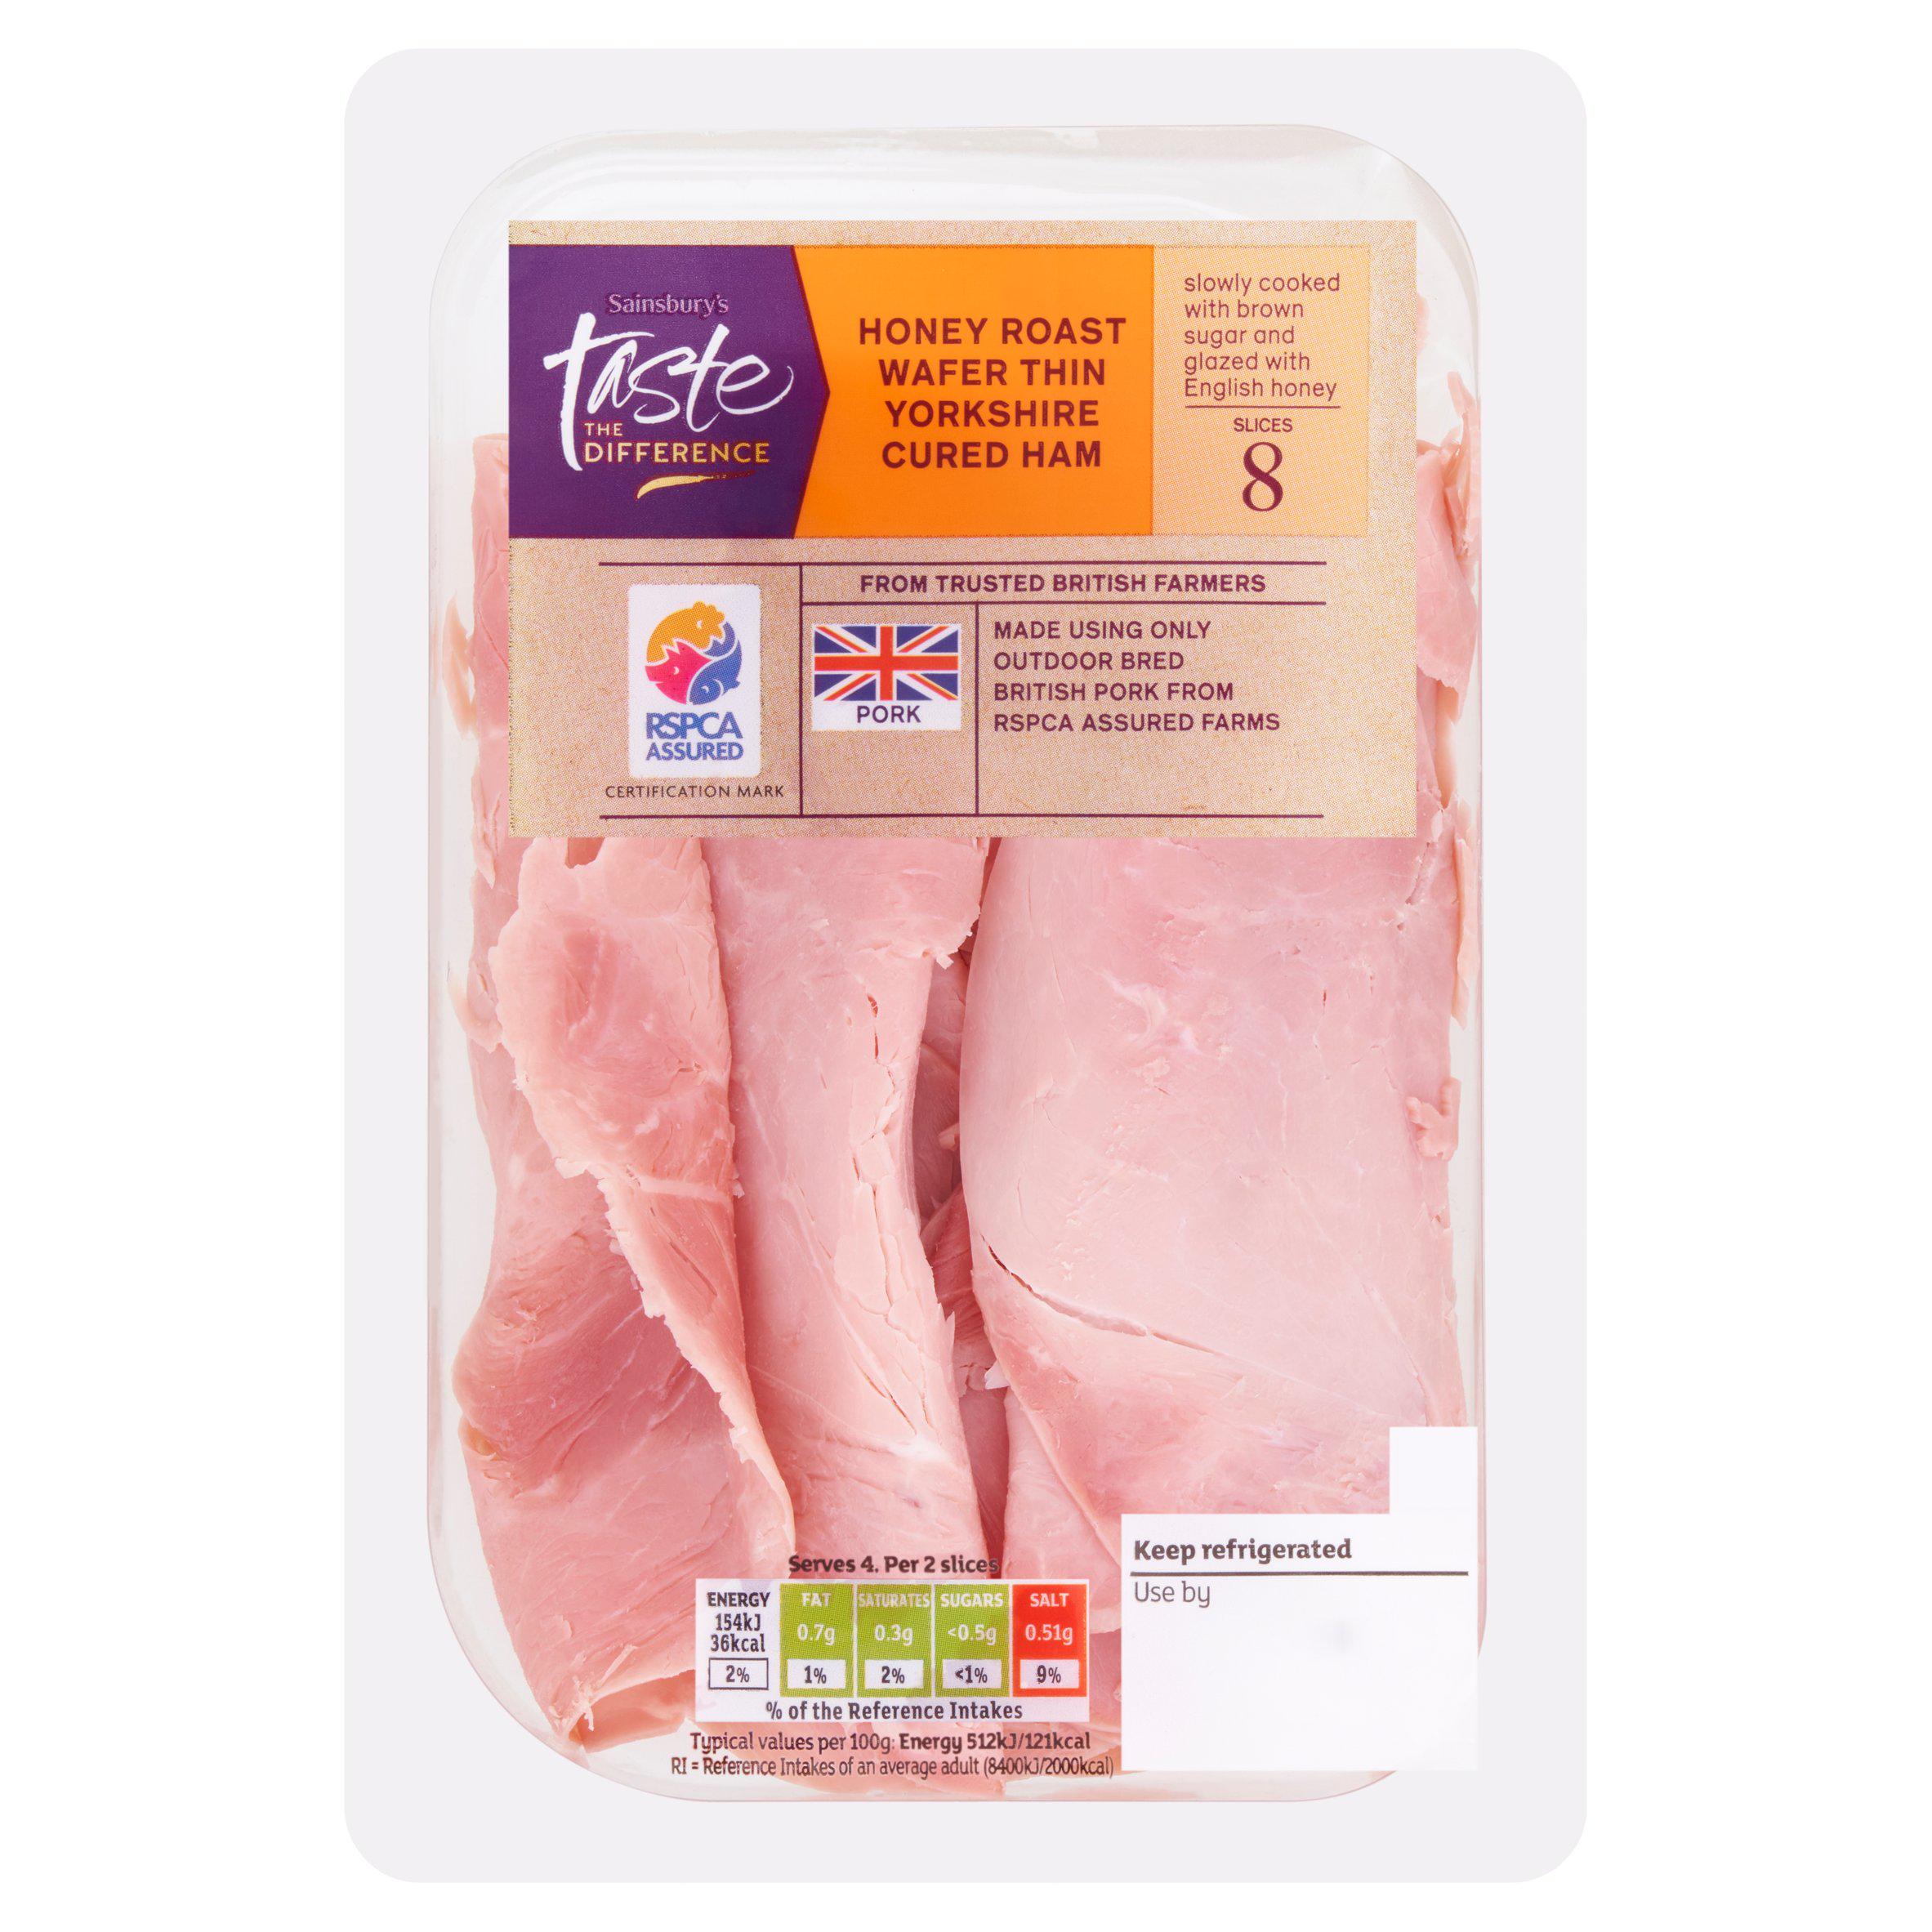 Sainsbury's Finely Sliced English Honey Roast Yorkshire Cured Cooked British Ham, Taste the Difference 120g